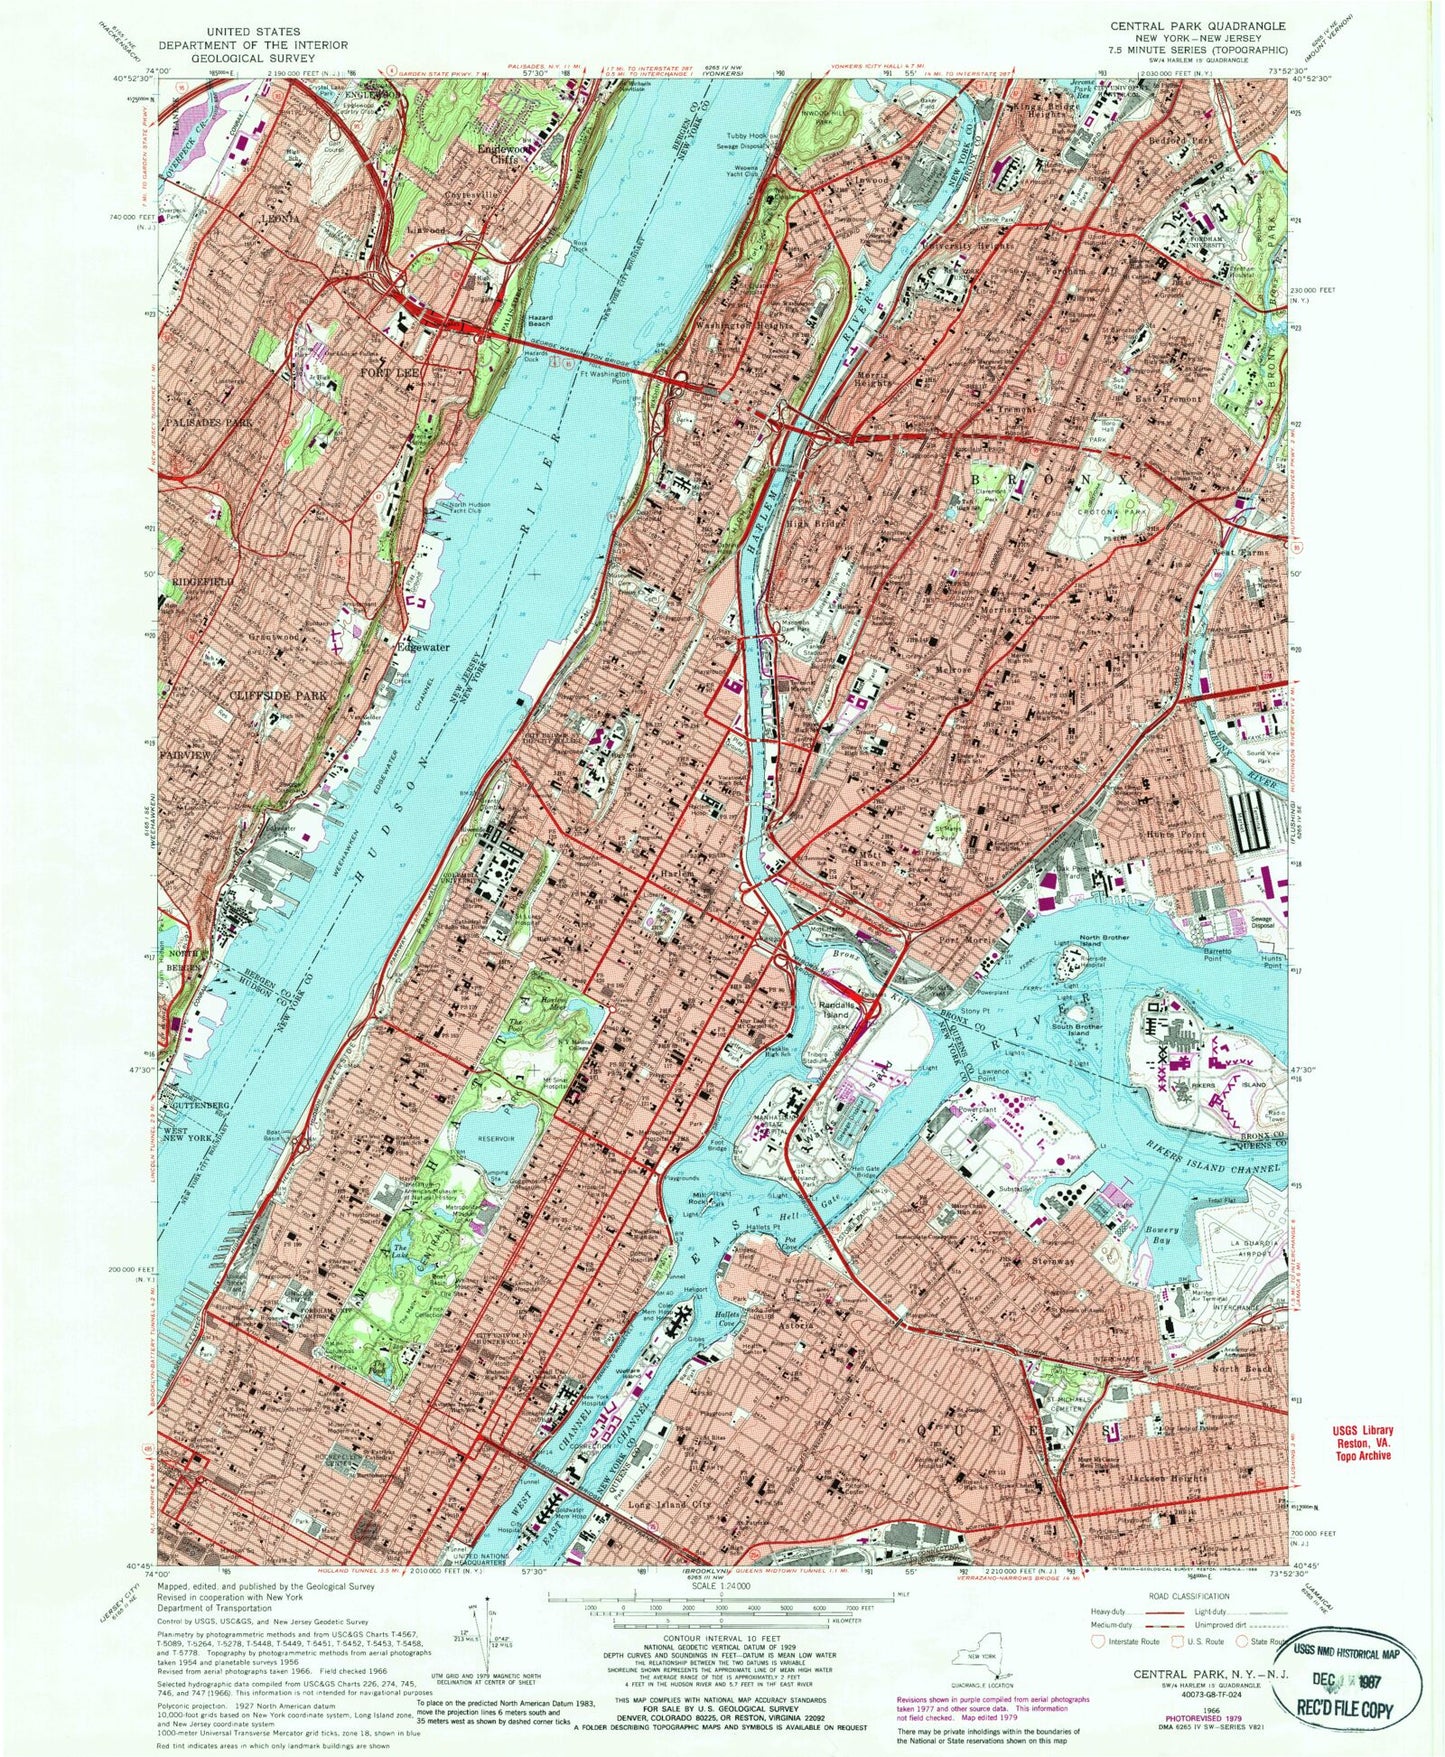 USGS Classic Central Park New York 7.5'x7.5' Topo Map Image